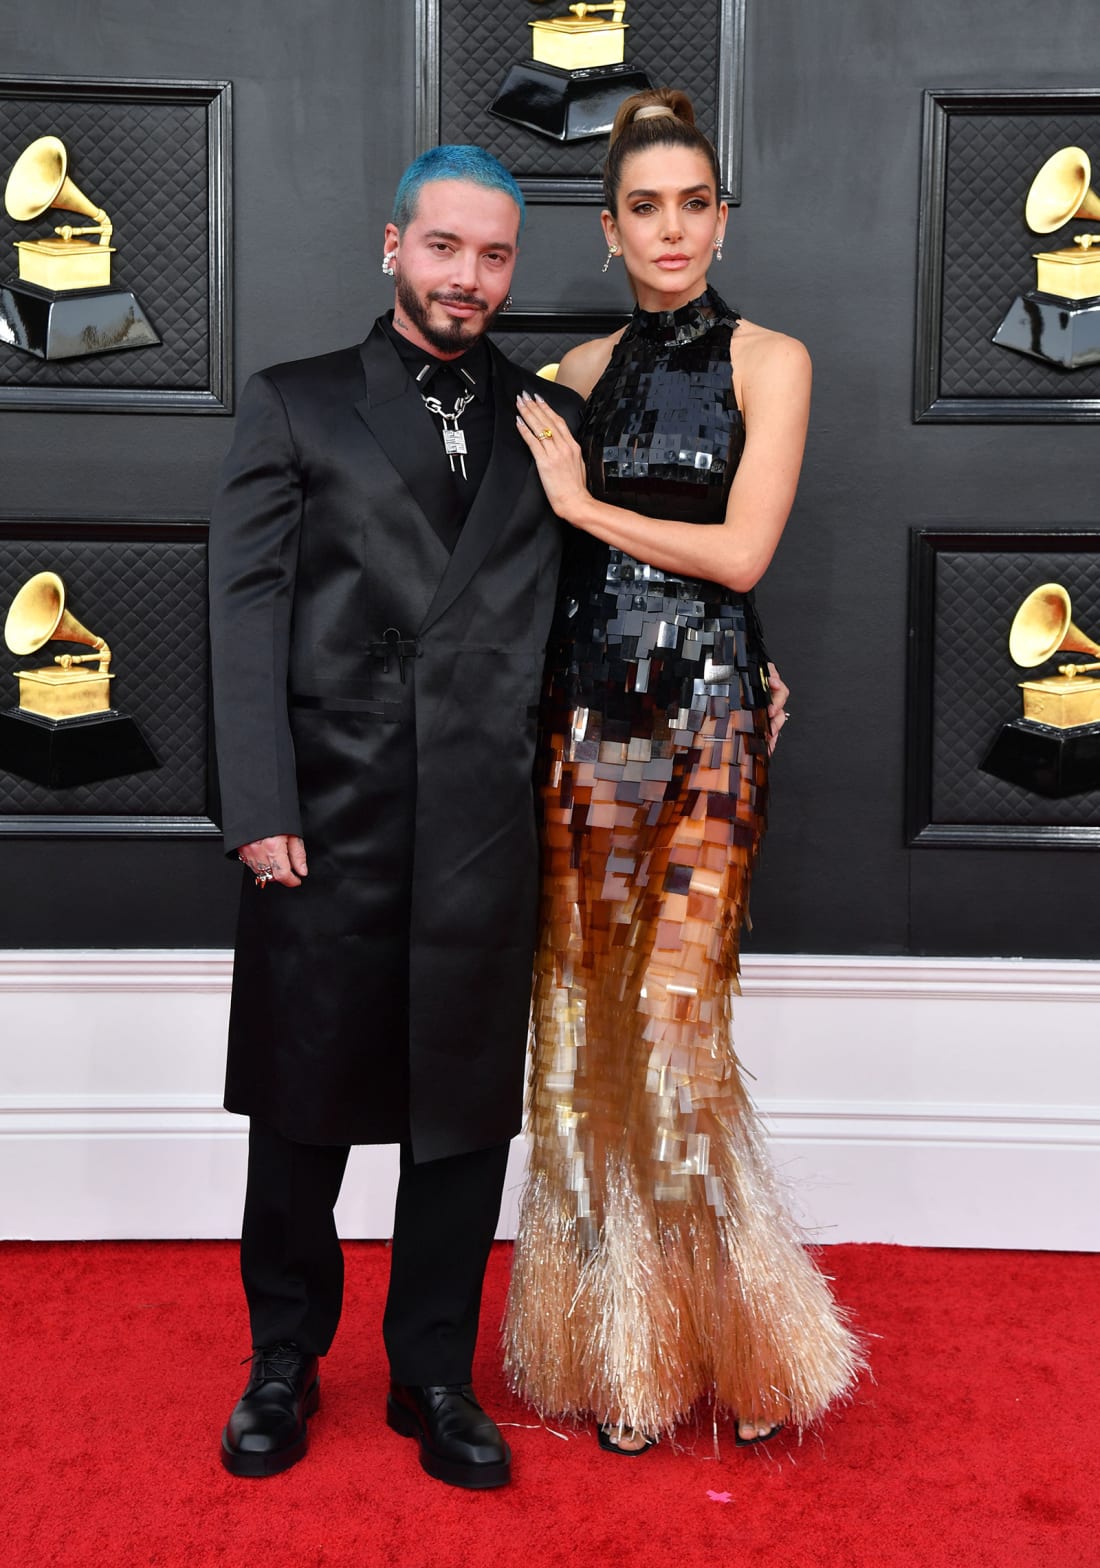 J Balvin elevated the suit silhouette in a tailored knee-length coat, while model Valentina Ferrer opted for a high-neck layered ombre dress with a gold fringed hem. 